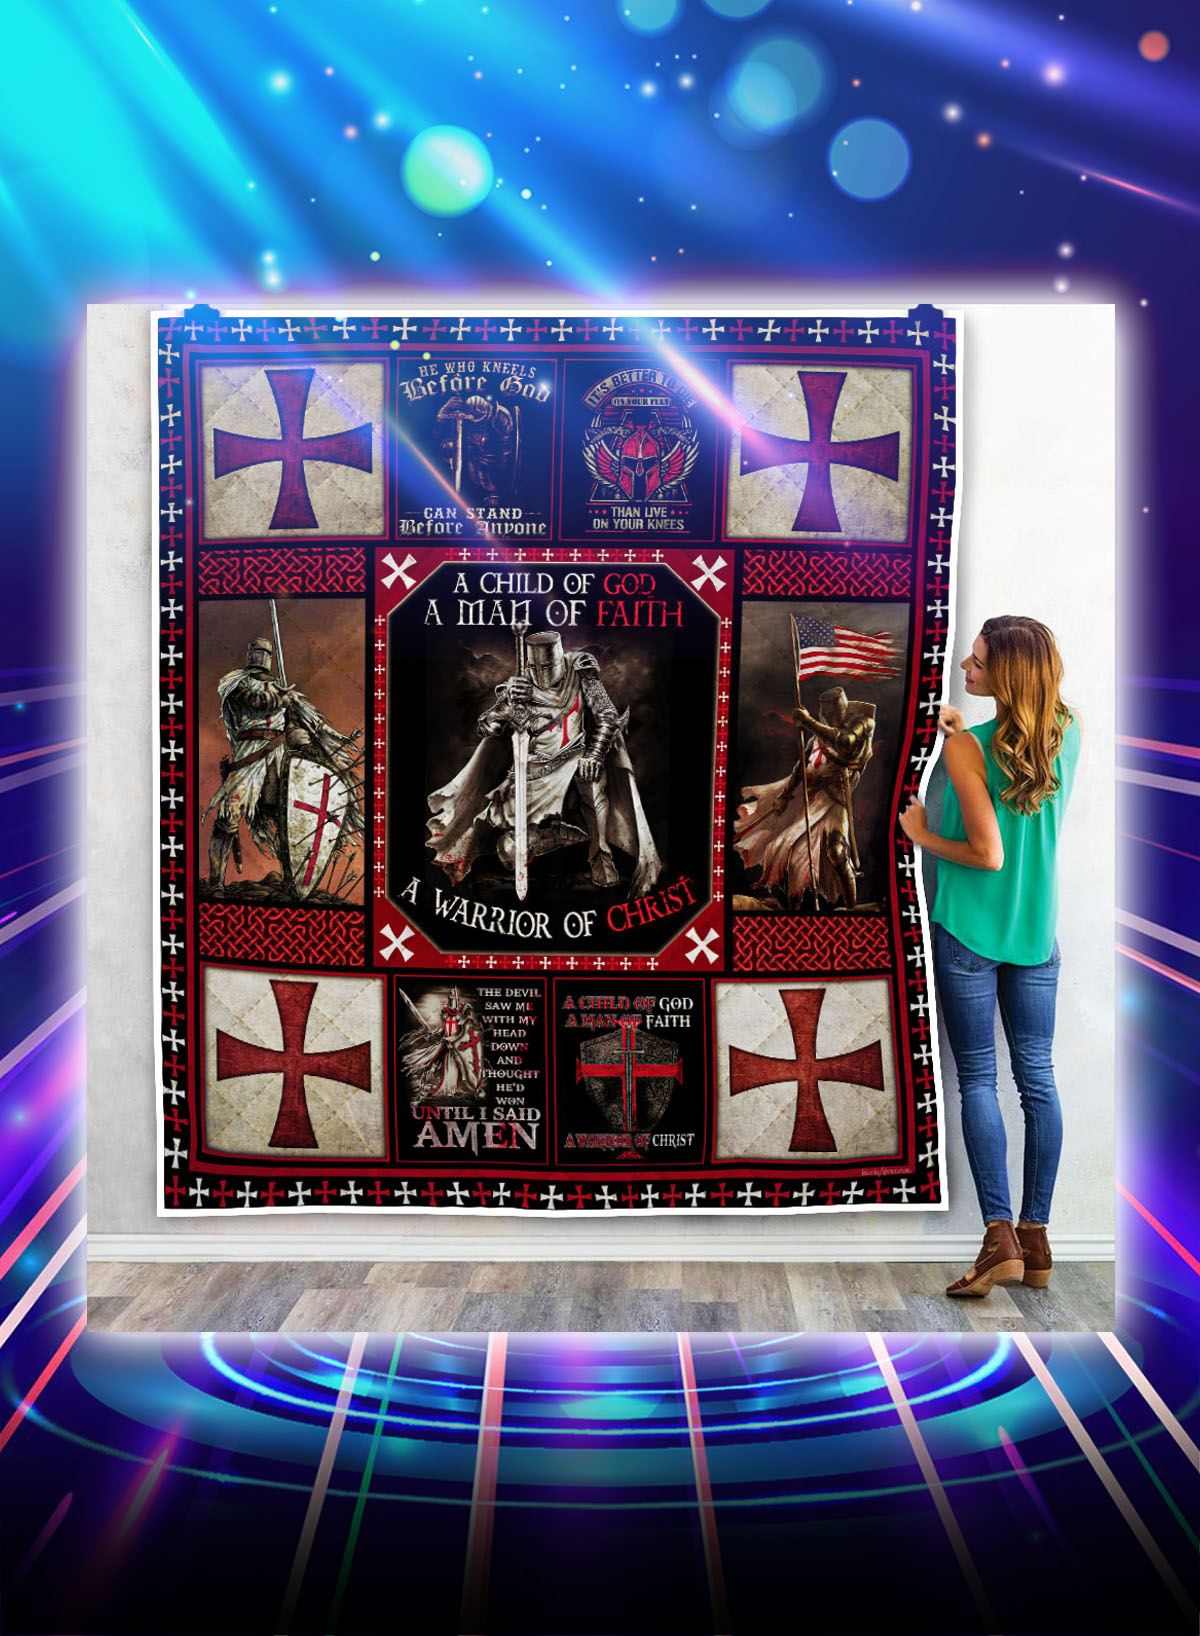 The knights templar a warrior of christ quilt blanket